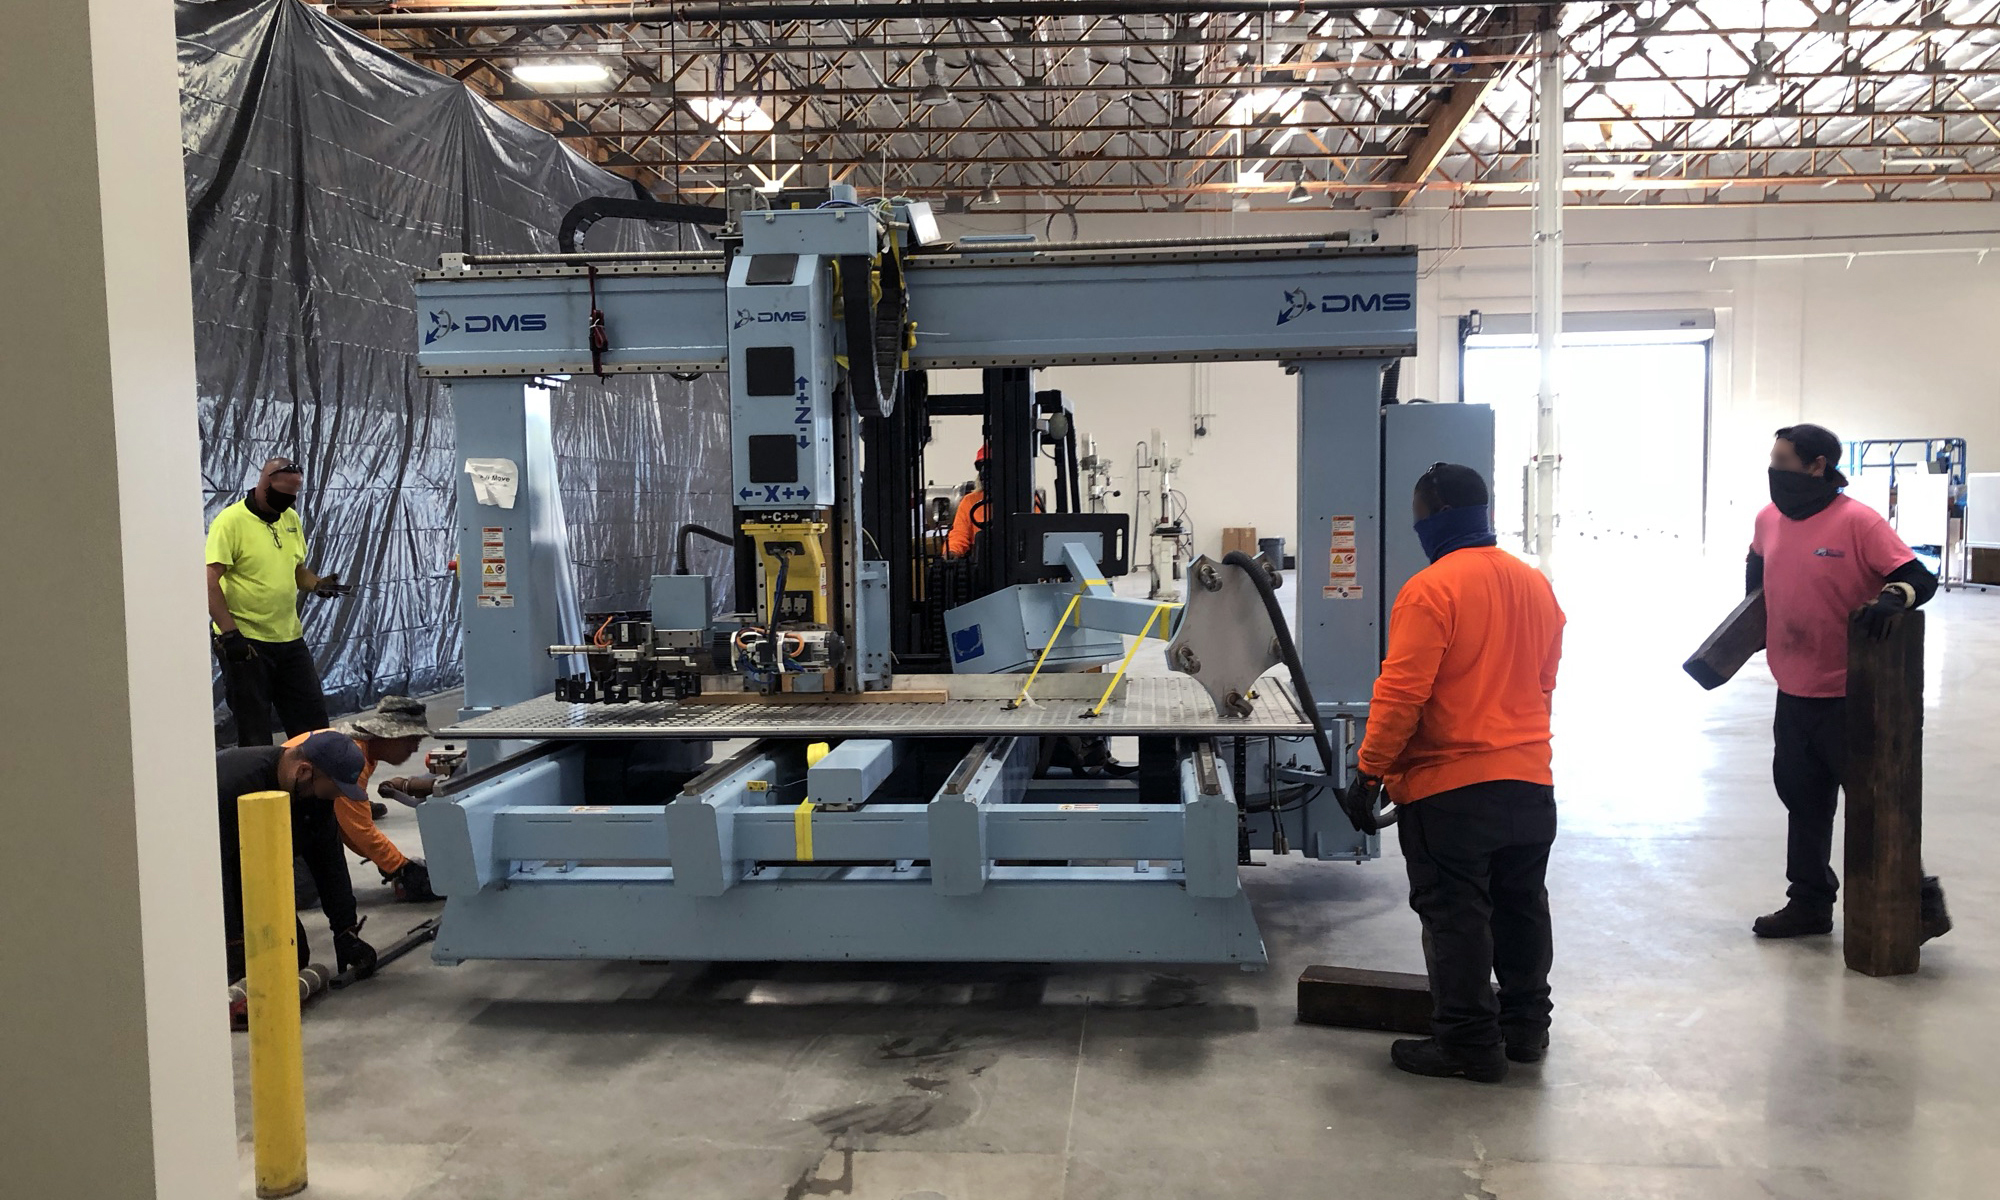 RWC Moving the 5-Axis Machine